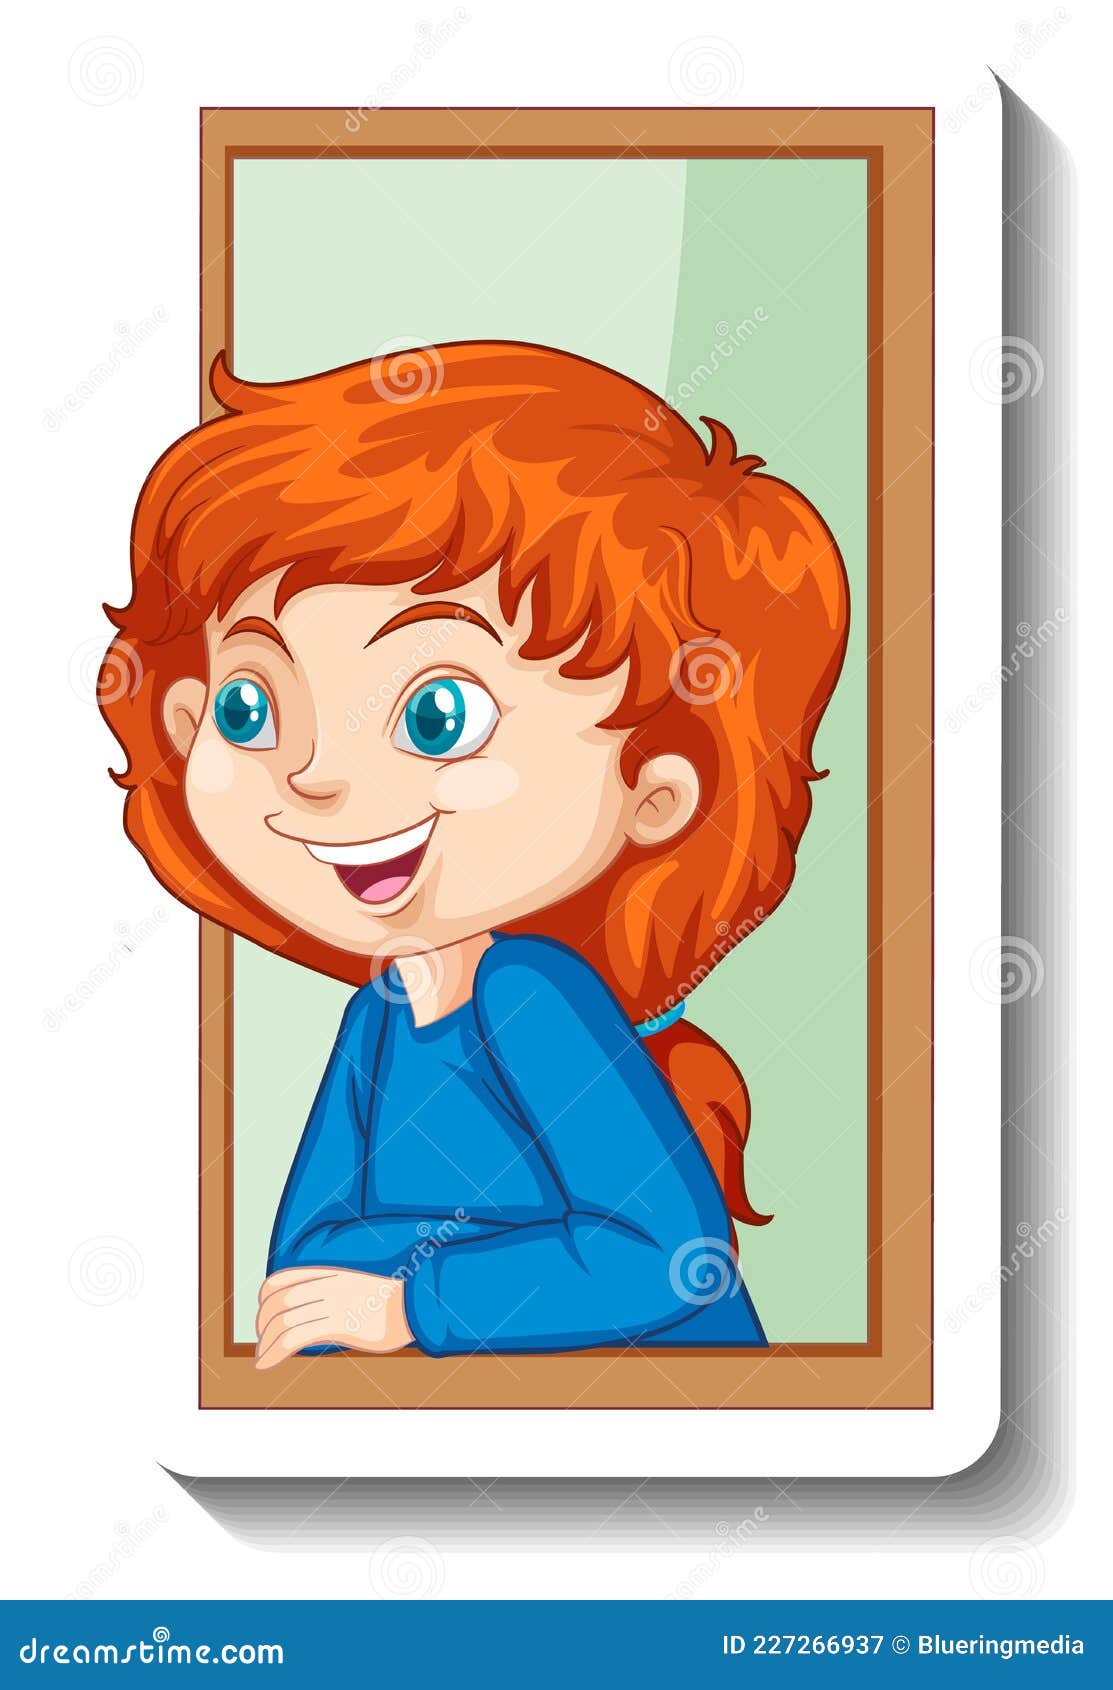 A Girl Looking Out of Window Cartoon Character Sticker Stock Vector ...